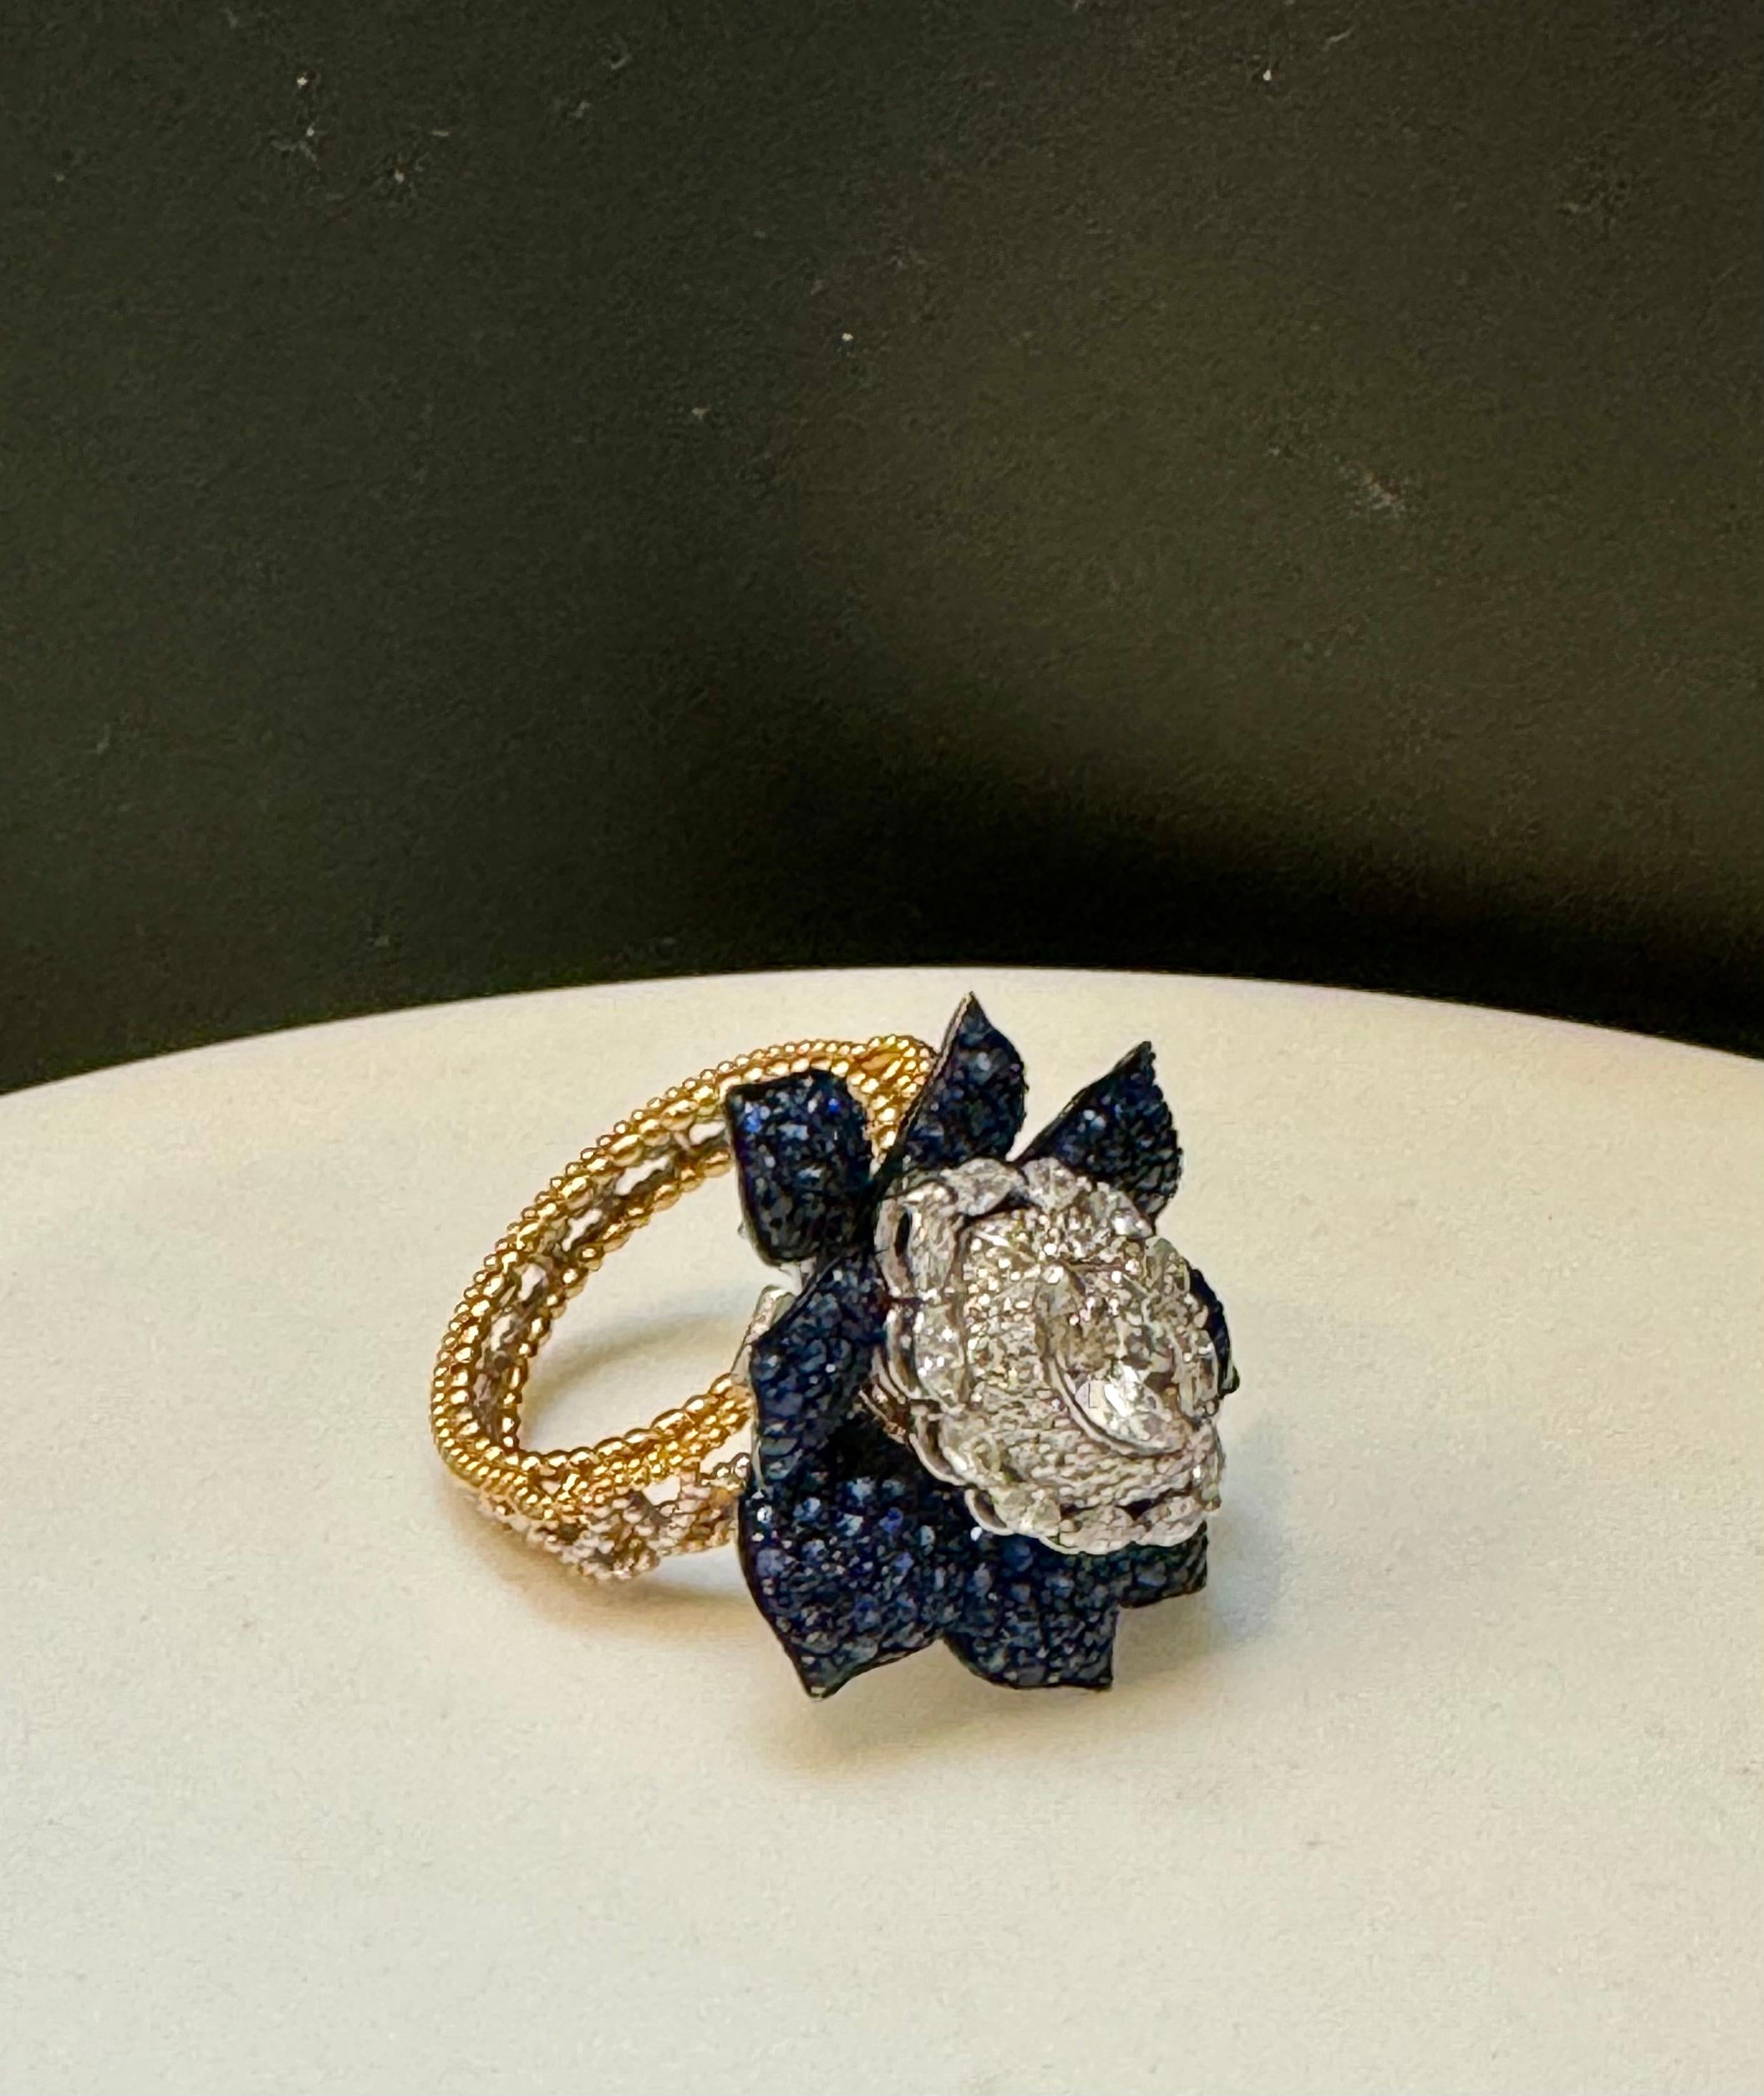 
3 Ct Blue Sapphire & 1.5 Ct Diamond Cocktail Ring in 18 Kt Two Tone  Gold  Size 7
Beautiful Flower Ring
Two tone ring as the band is made out of Yellow gold and top of the ring is White gold.
Pave set Blue Sapphires are making the petals .
Total